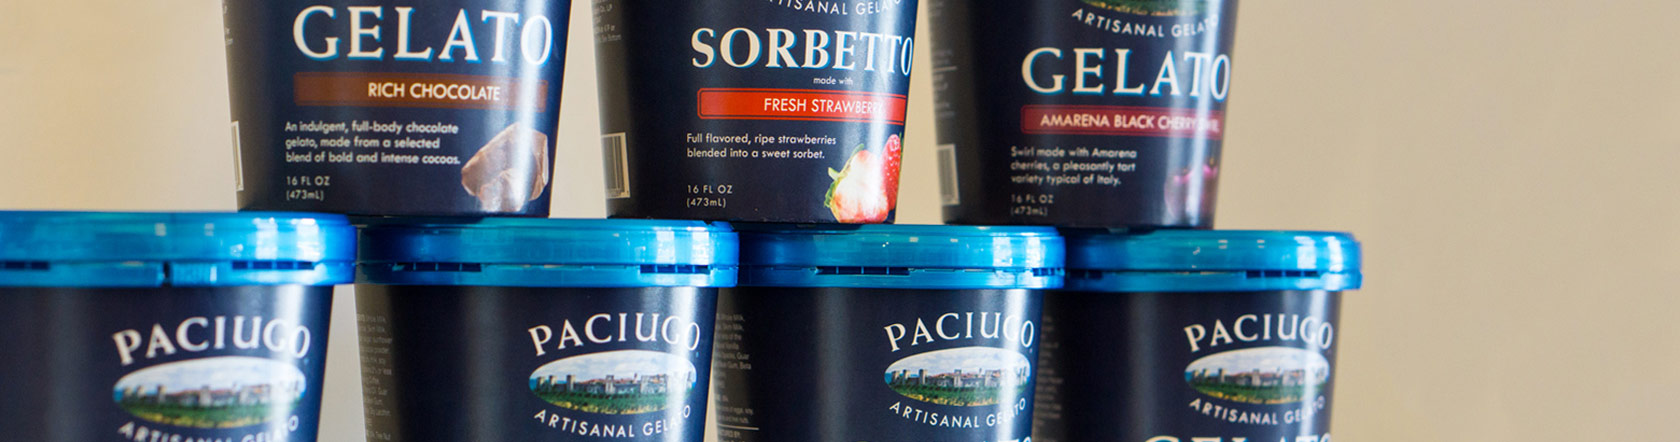 Fresh ingredients are used in Paciugo's Gelato.